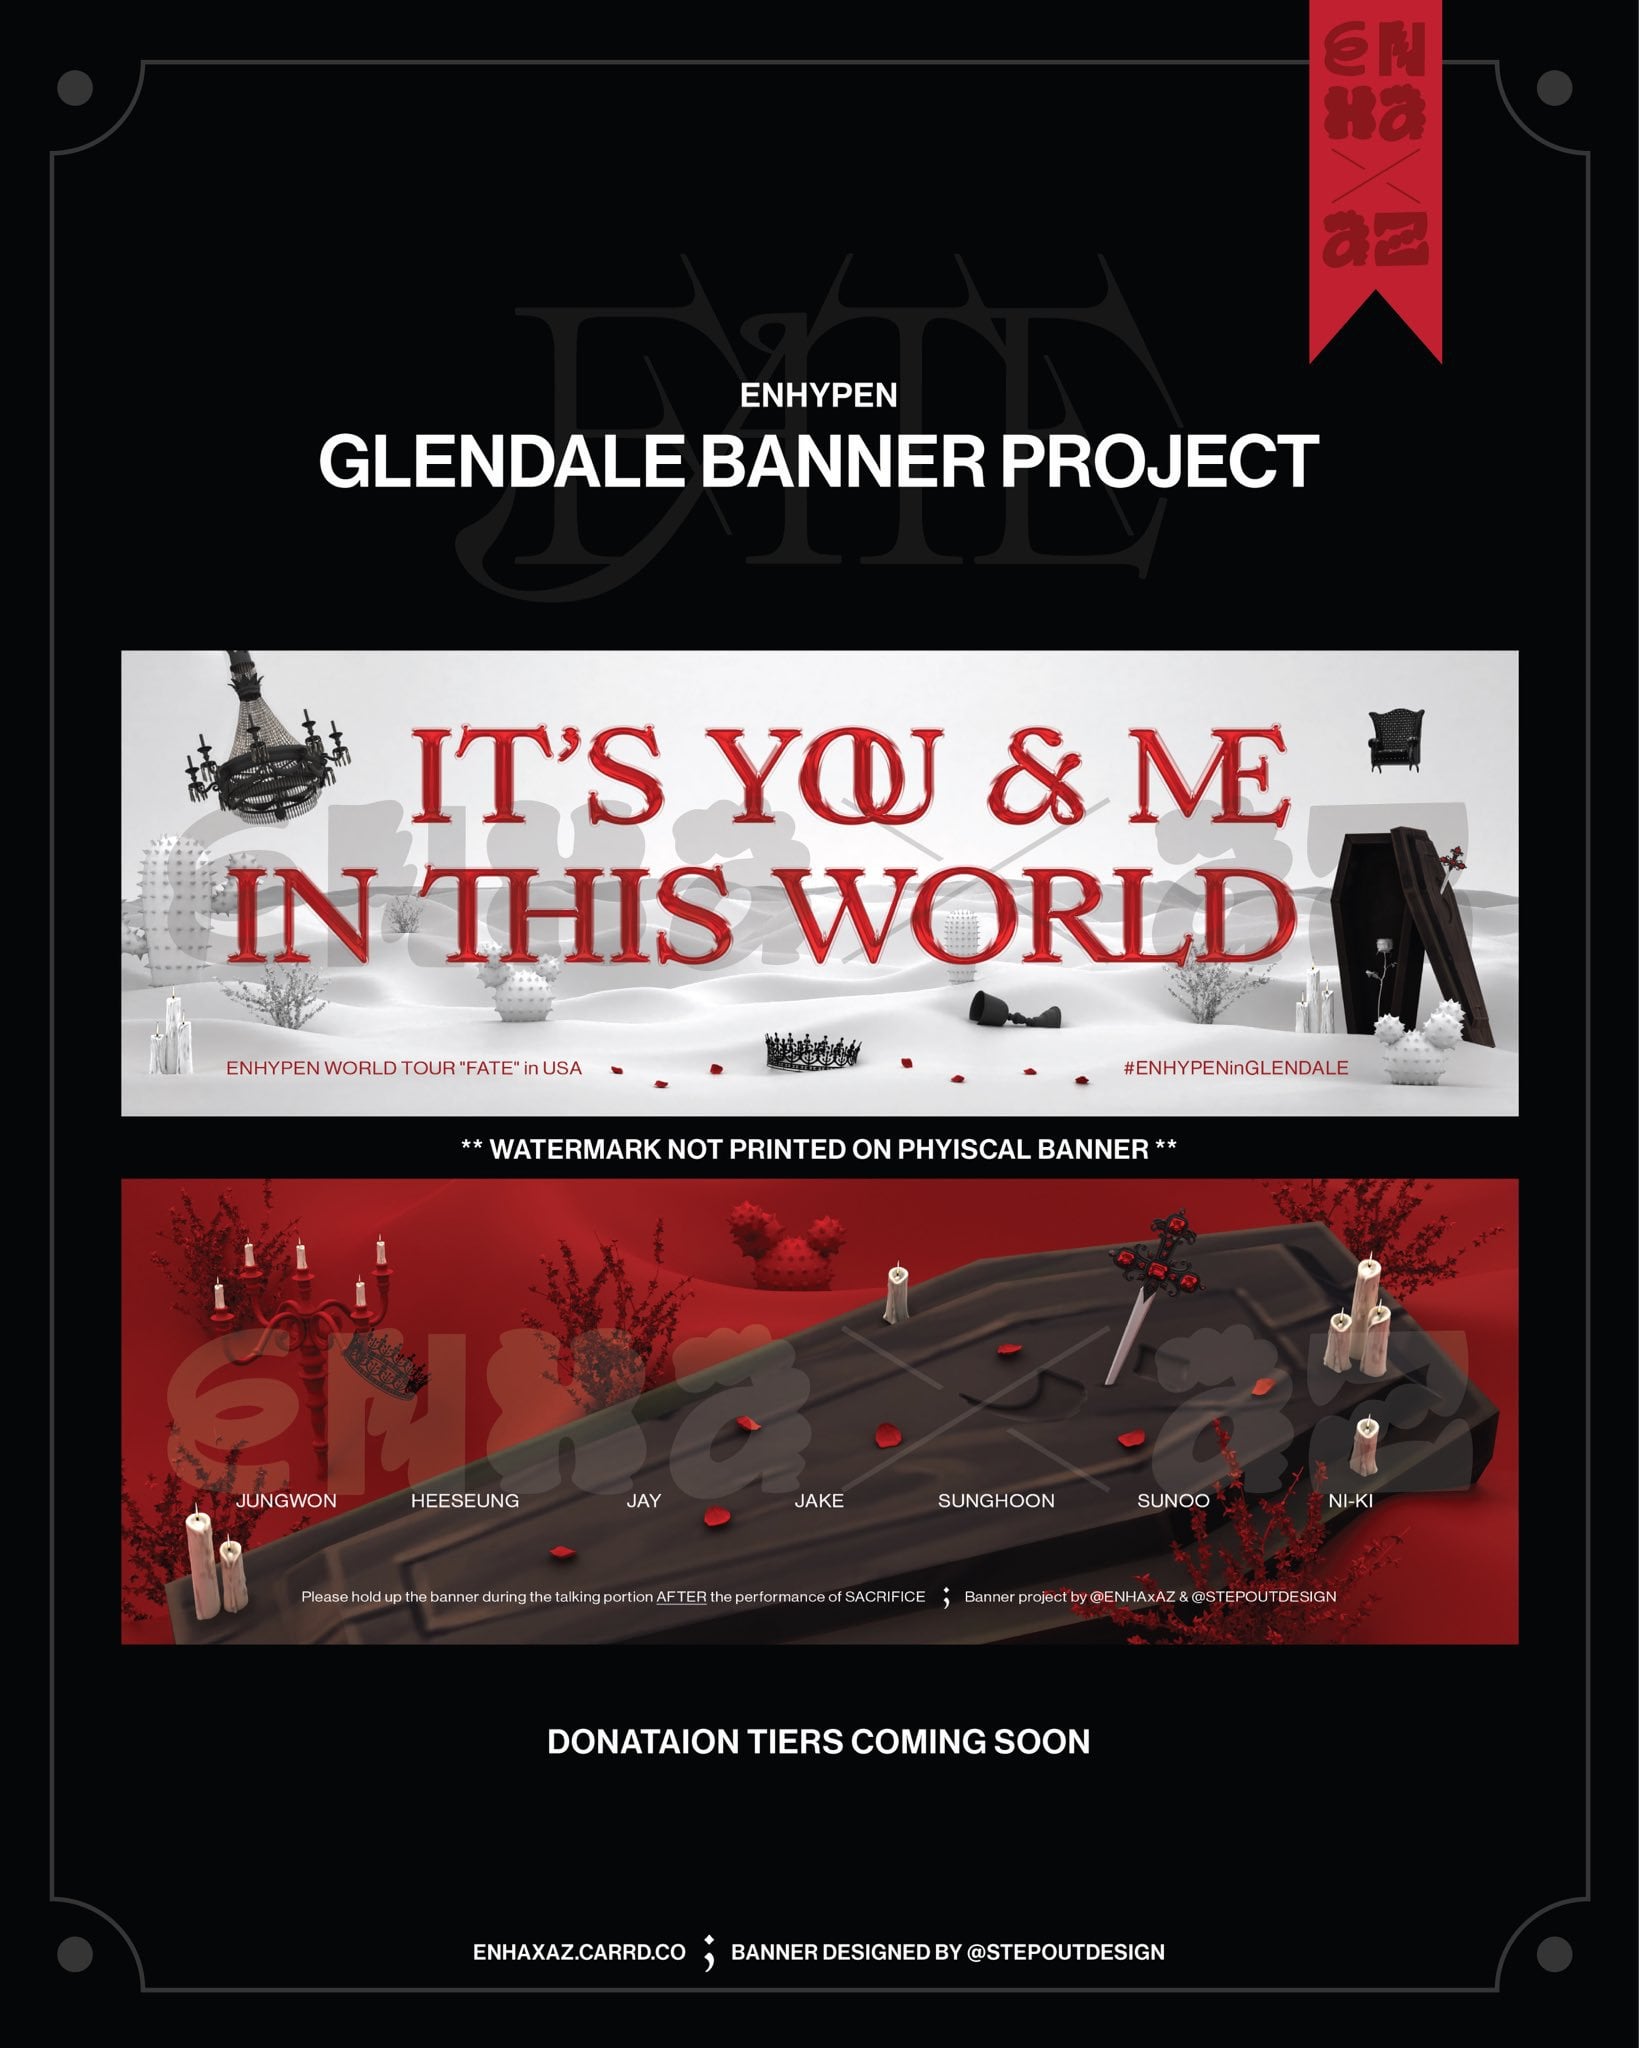 Glendale Banner Project for Enhypen's Fate Tour!